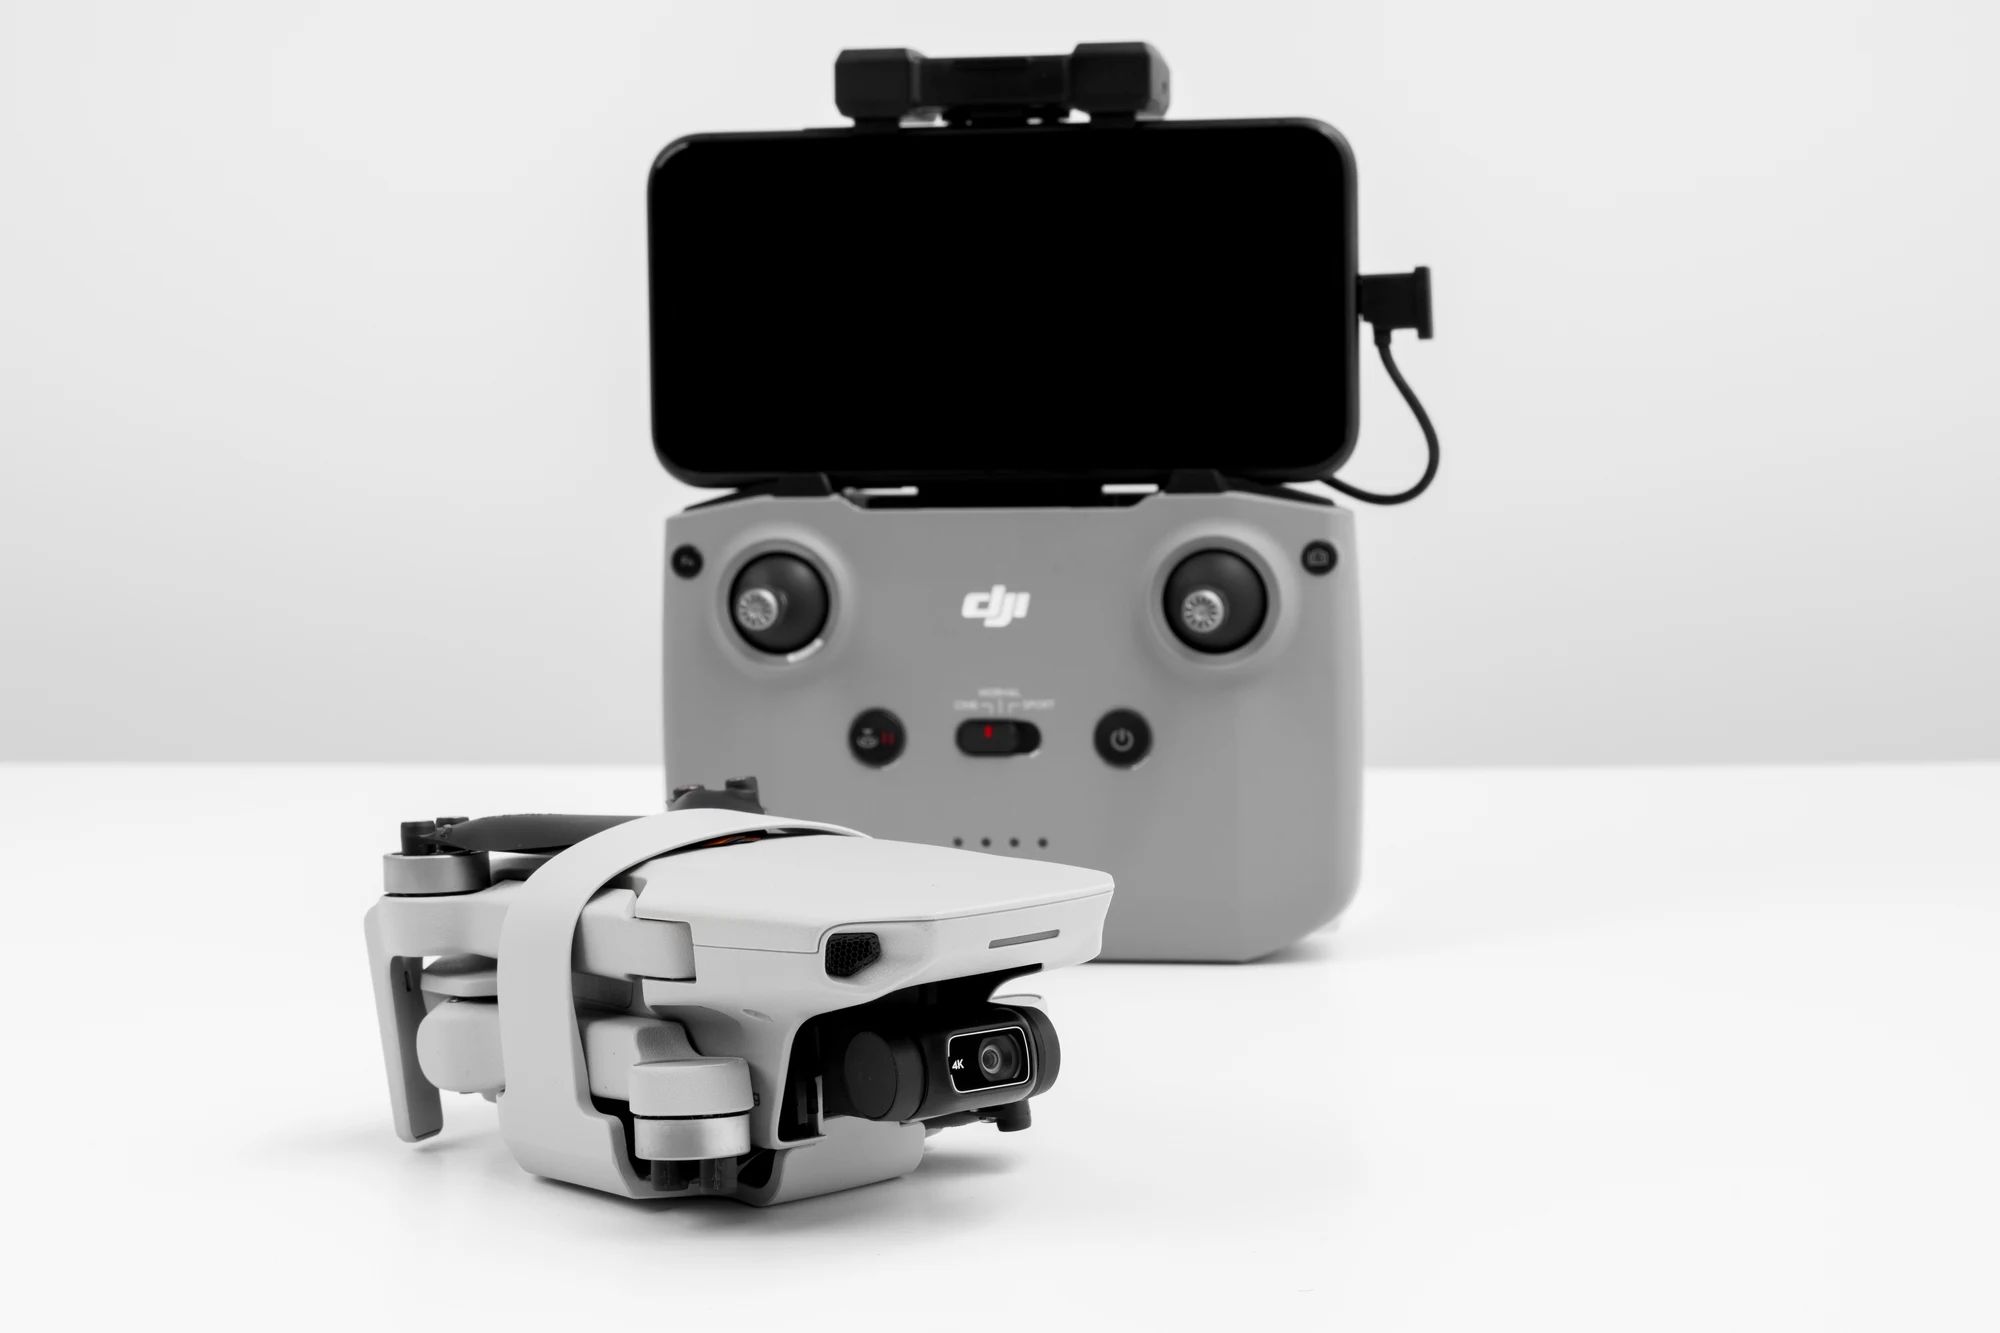 What Phones Are Compatible With DJI Mini 2